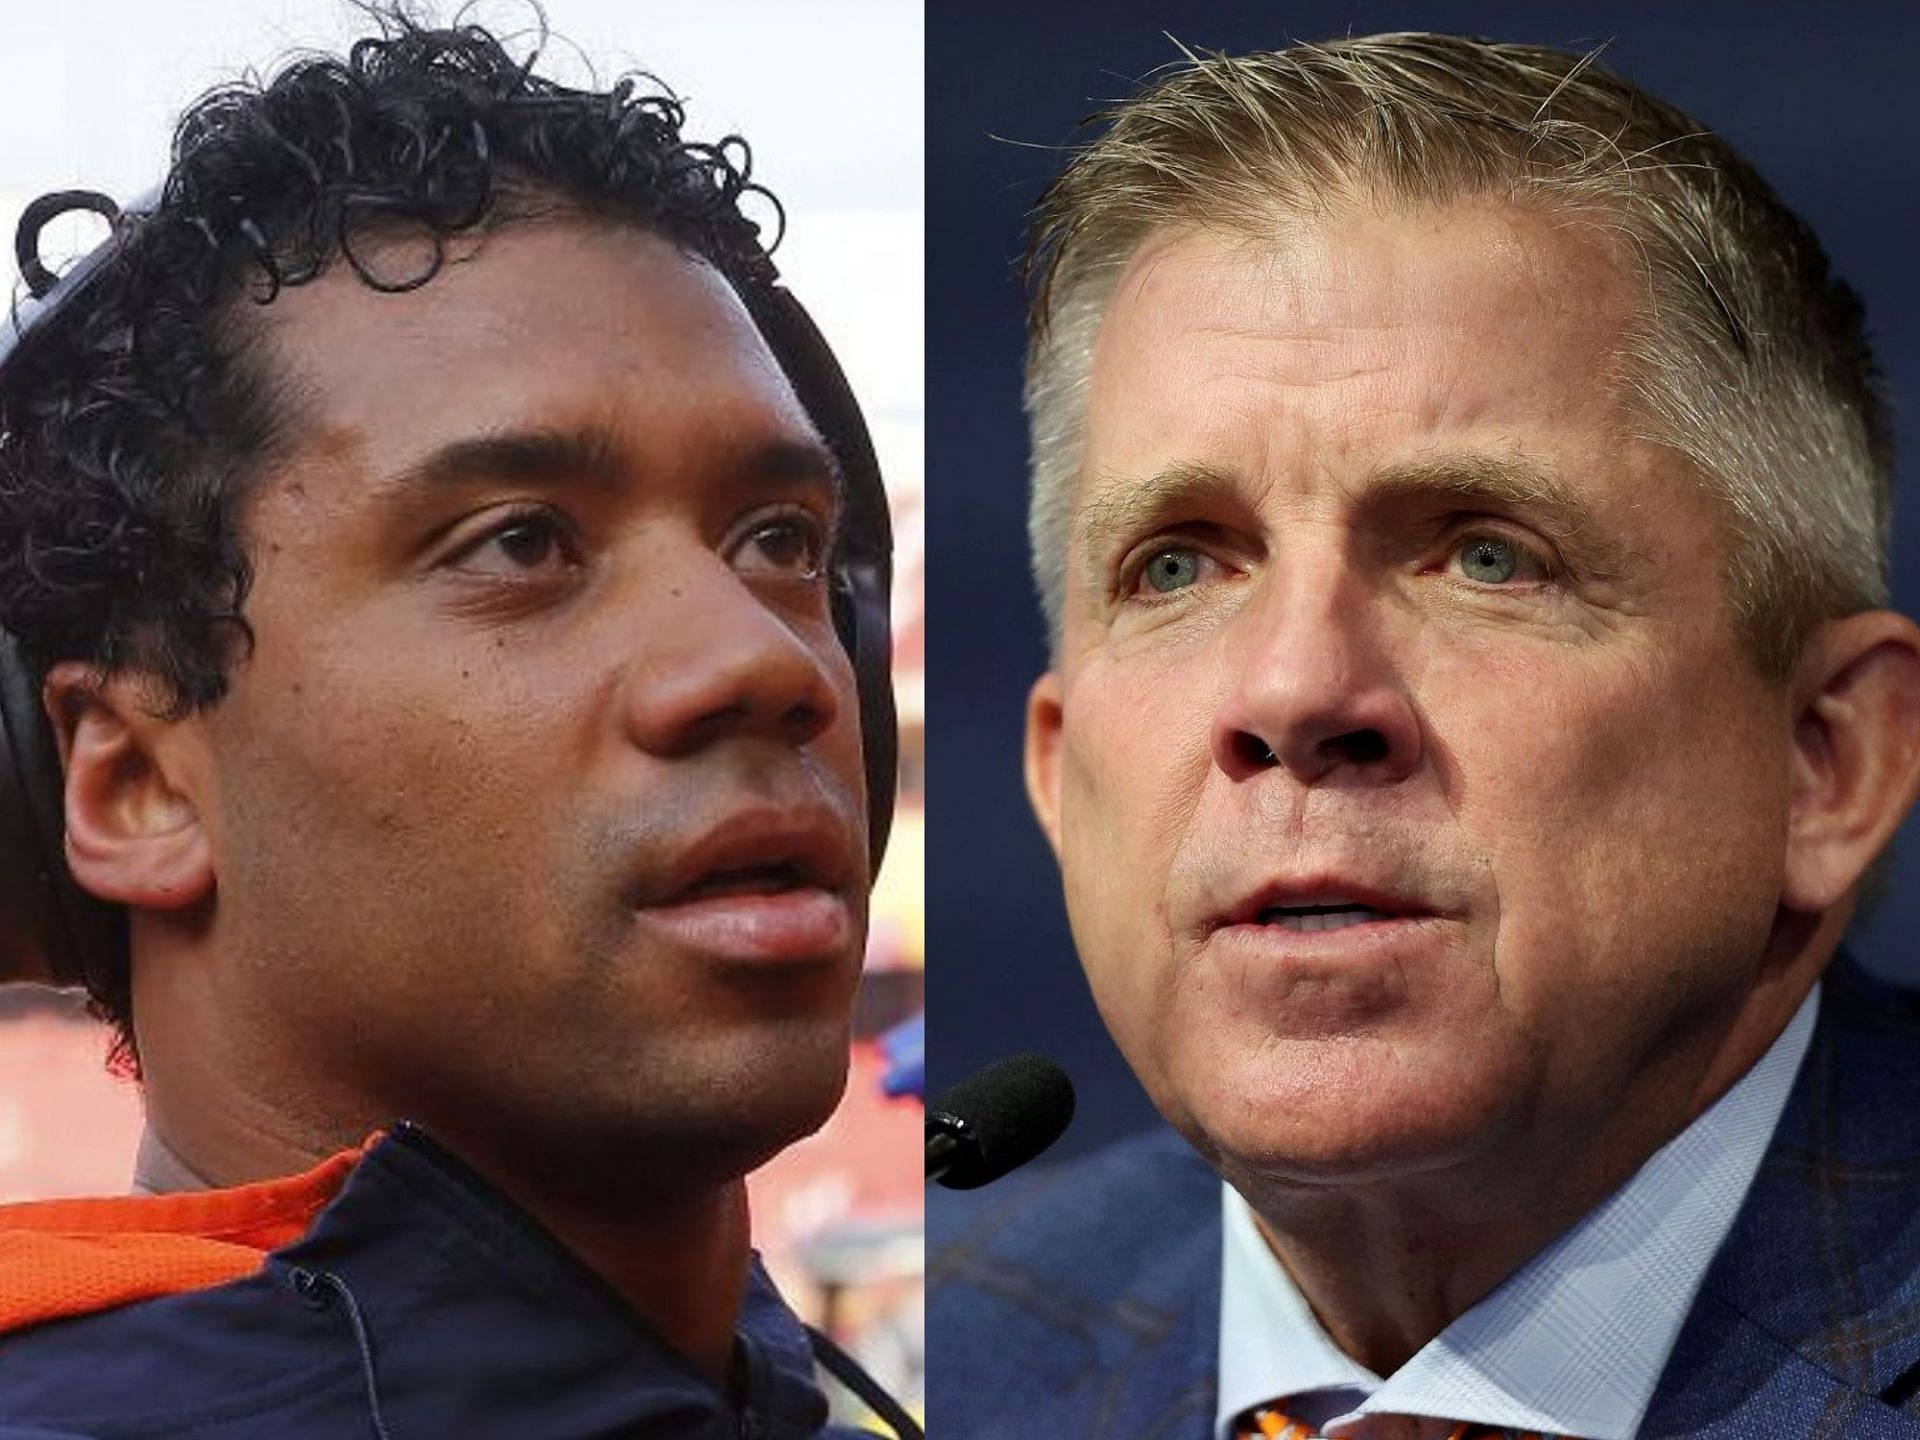 Sean Payton calls out media in defense of Russell Wilson